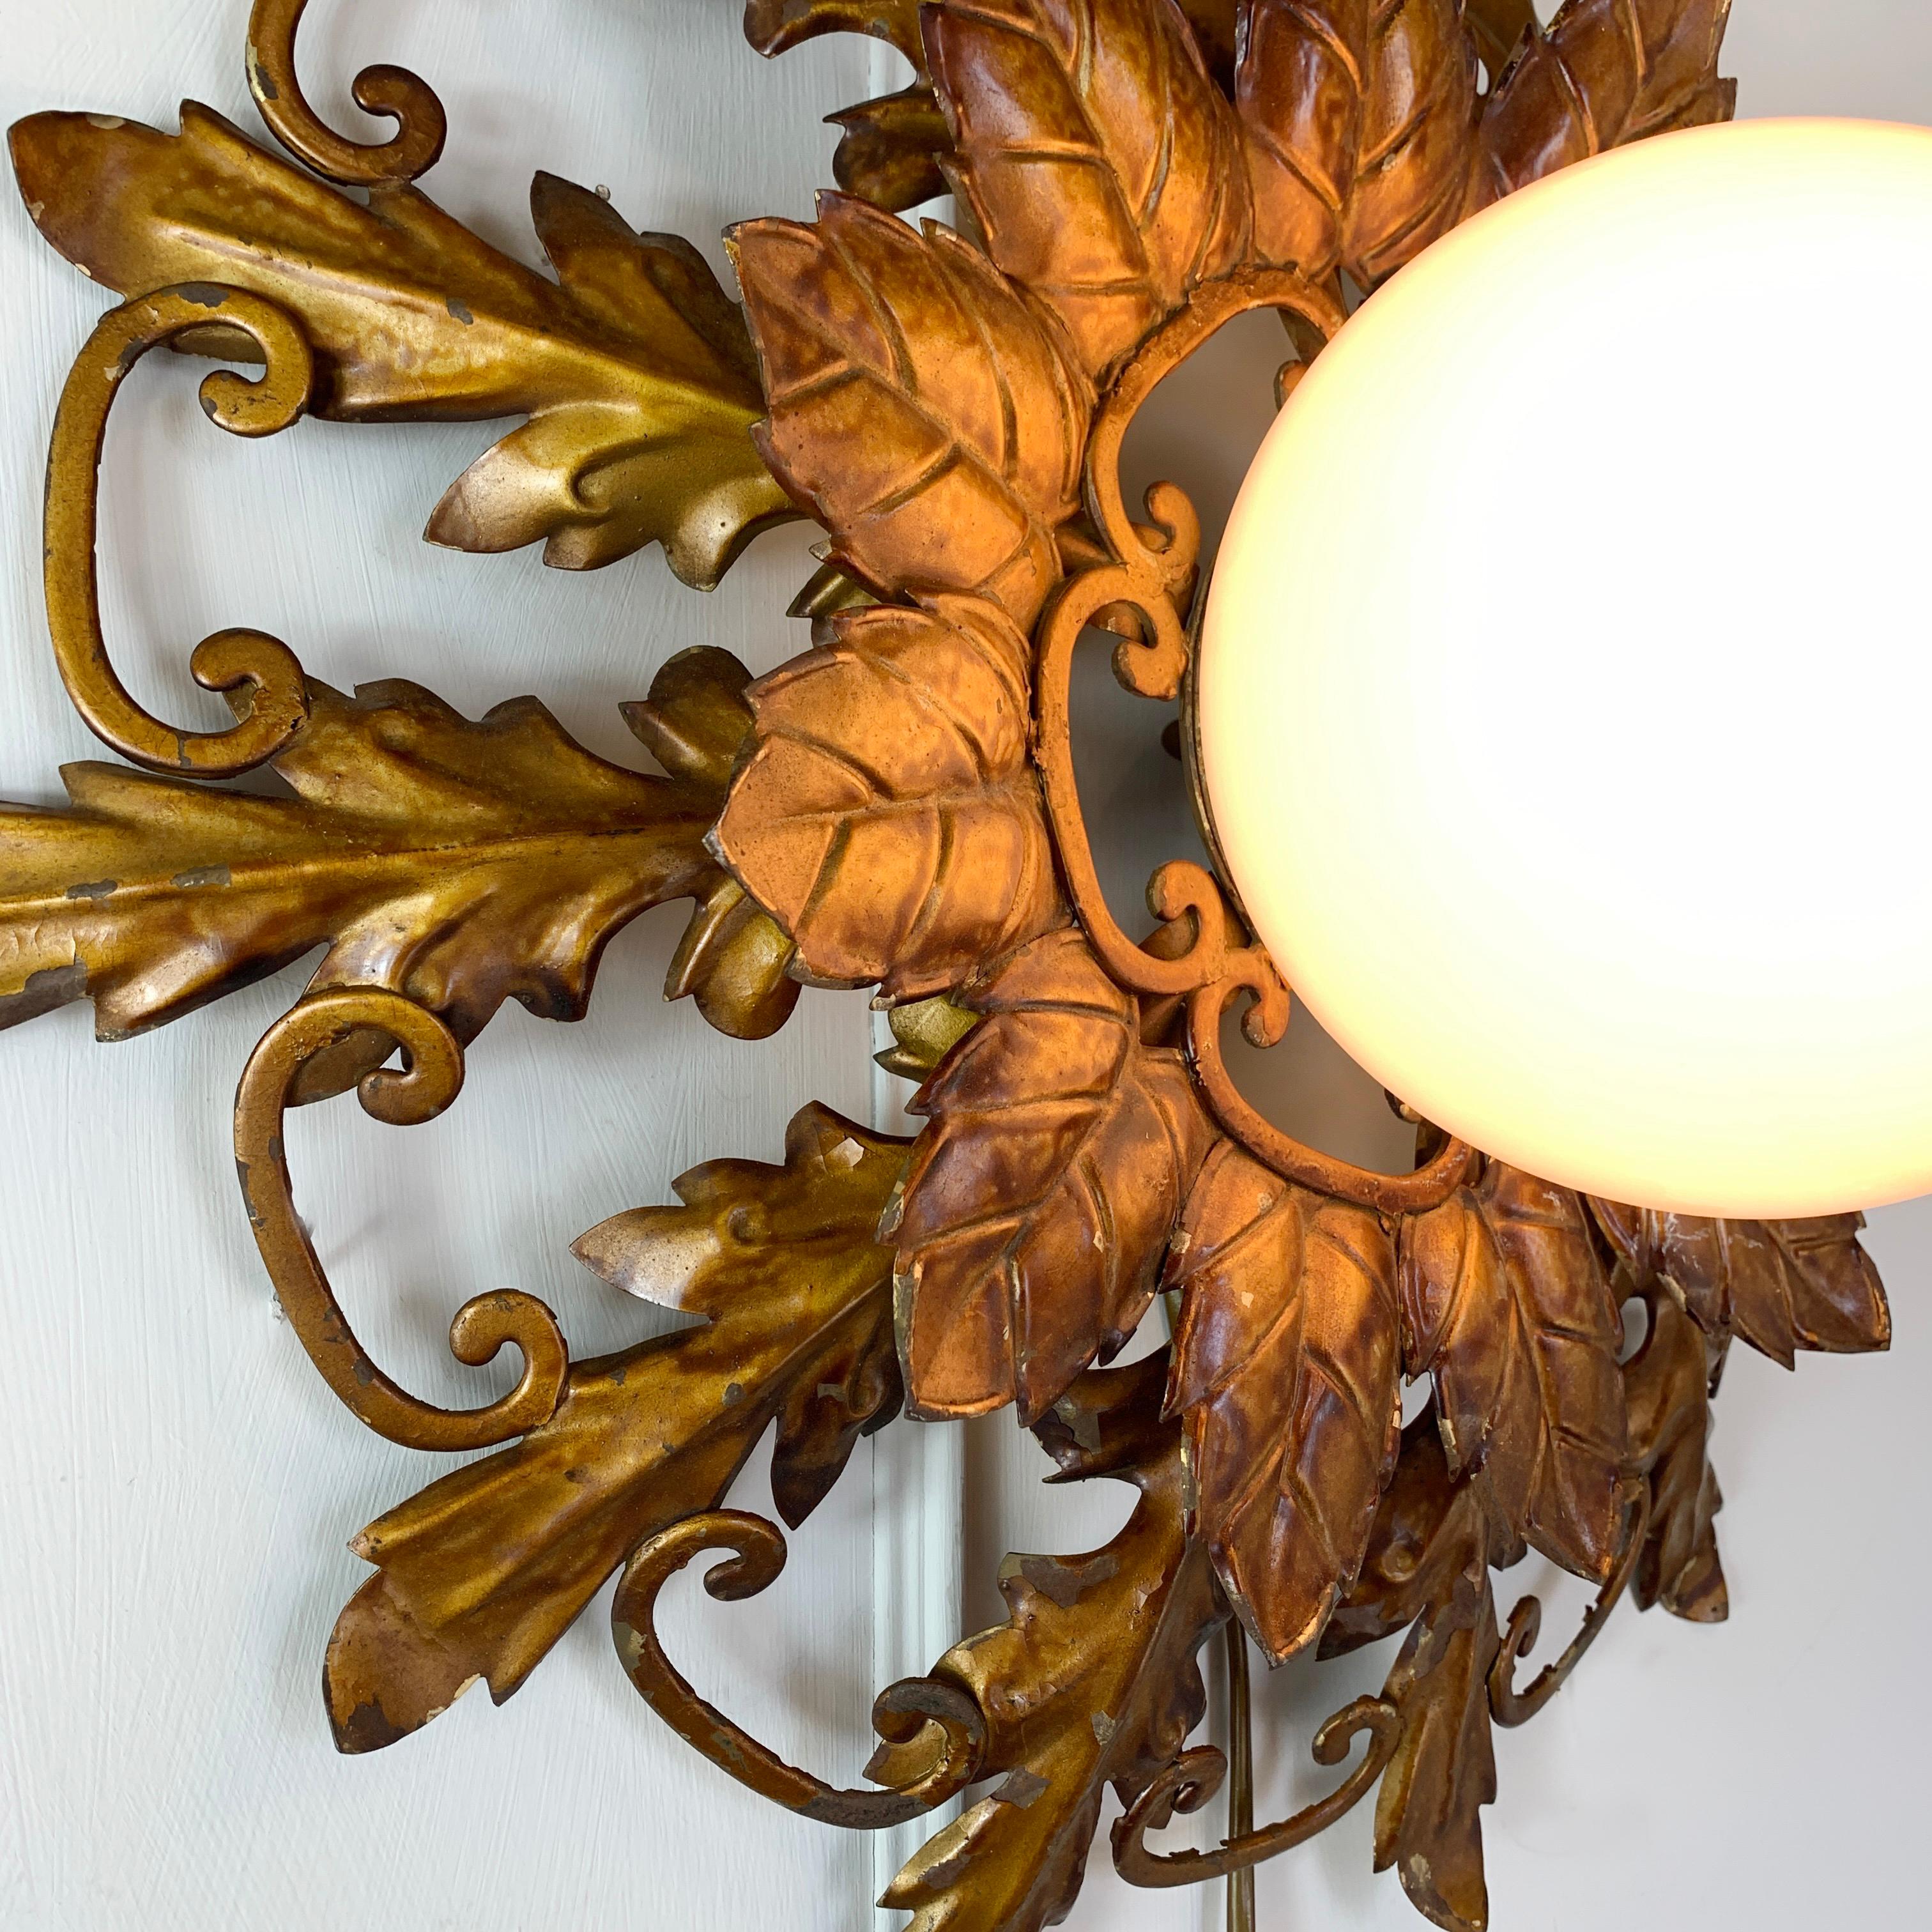 A beautiful and ornate Spanish iron work sunburst light that could be used either on a ceiling or wall, hand finished in antique gold, with a single central lamp holder that sits behind the glass globe lamp cover. Very well proportioned and in